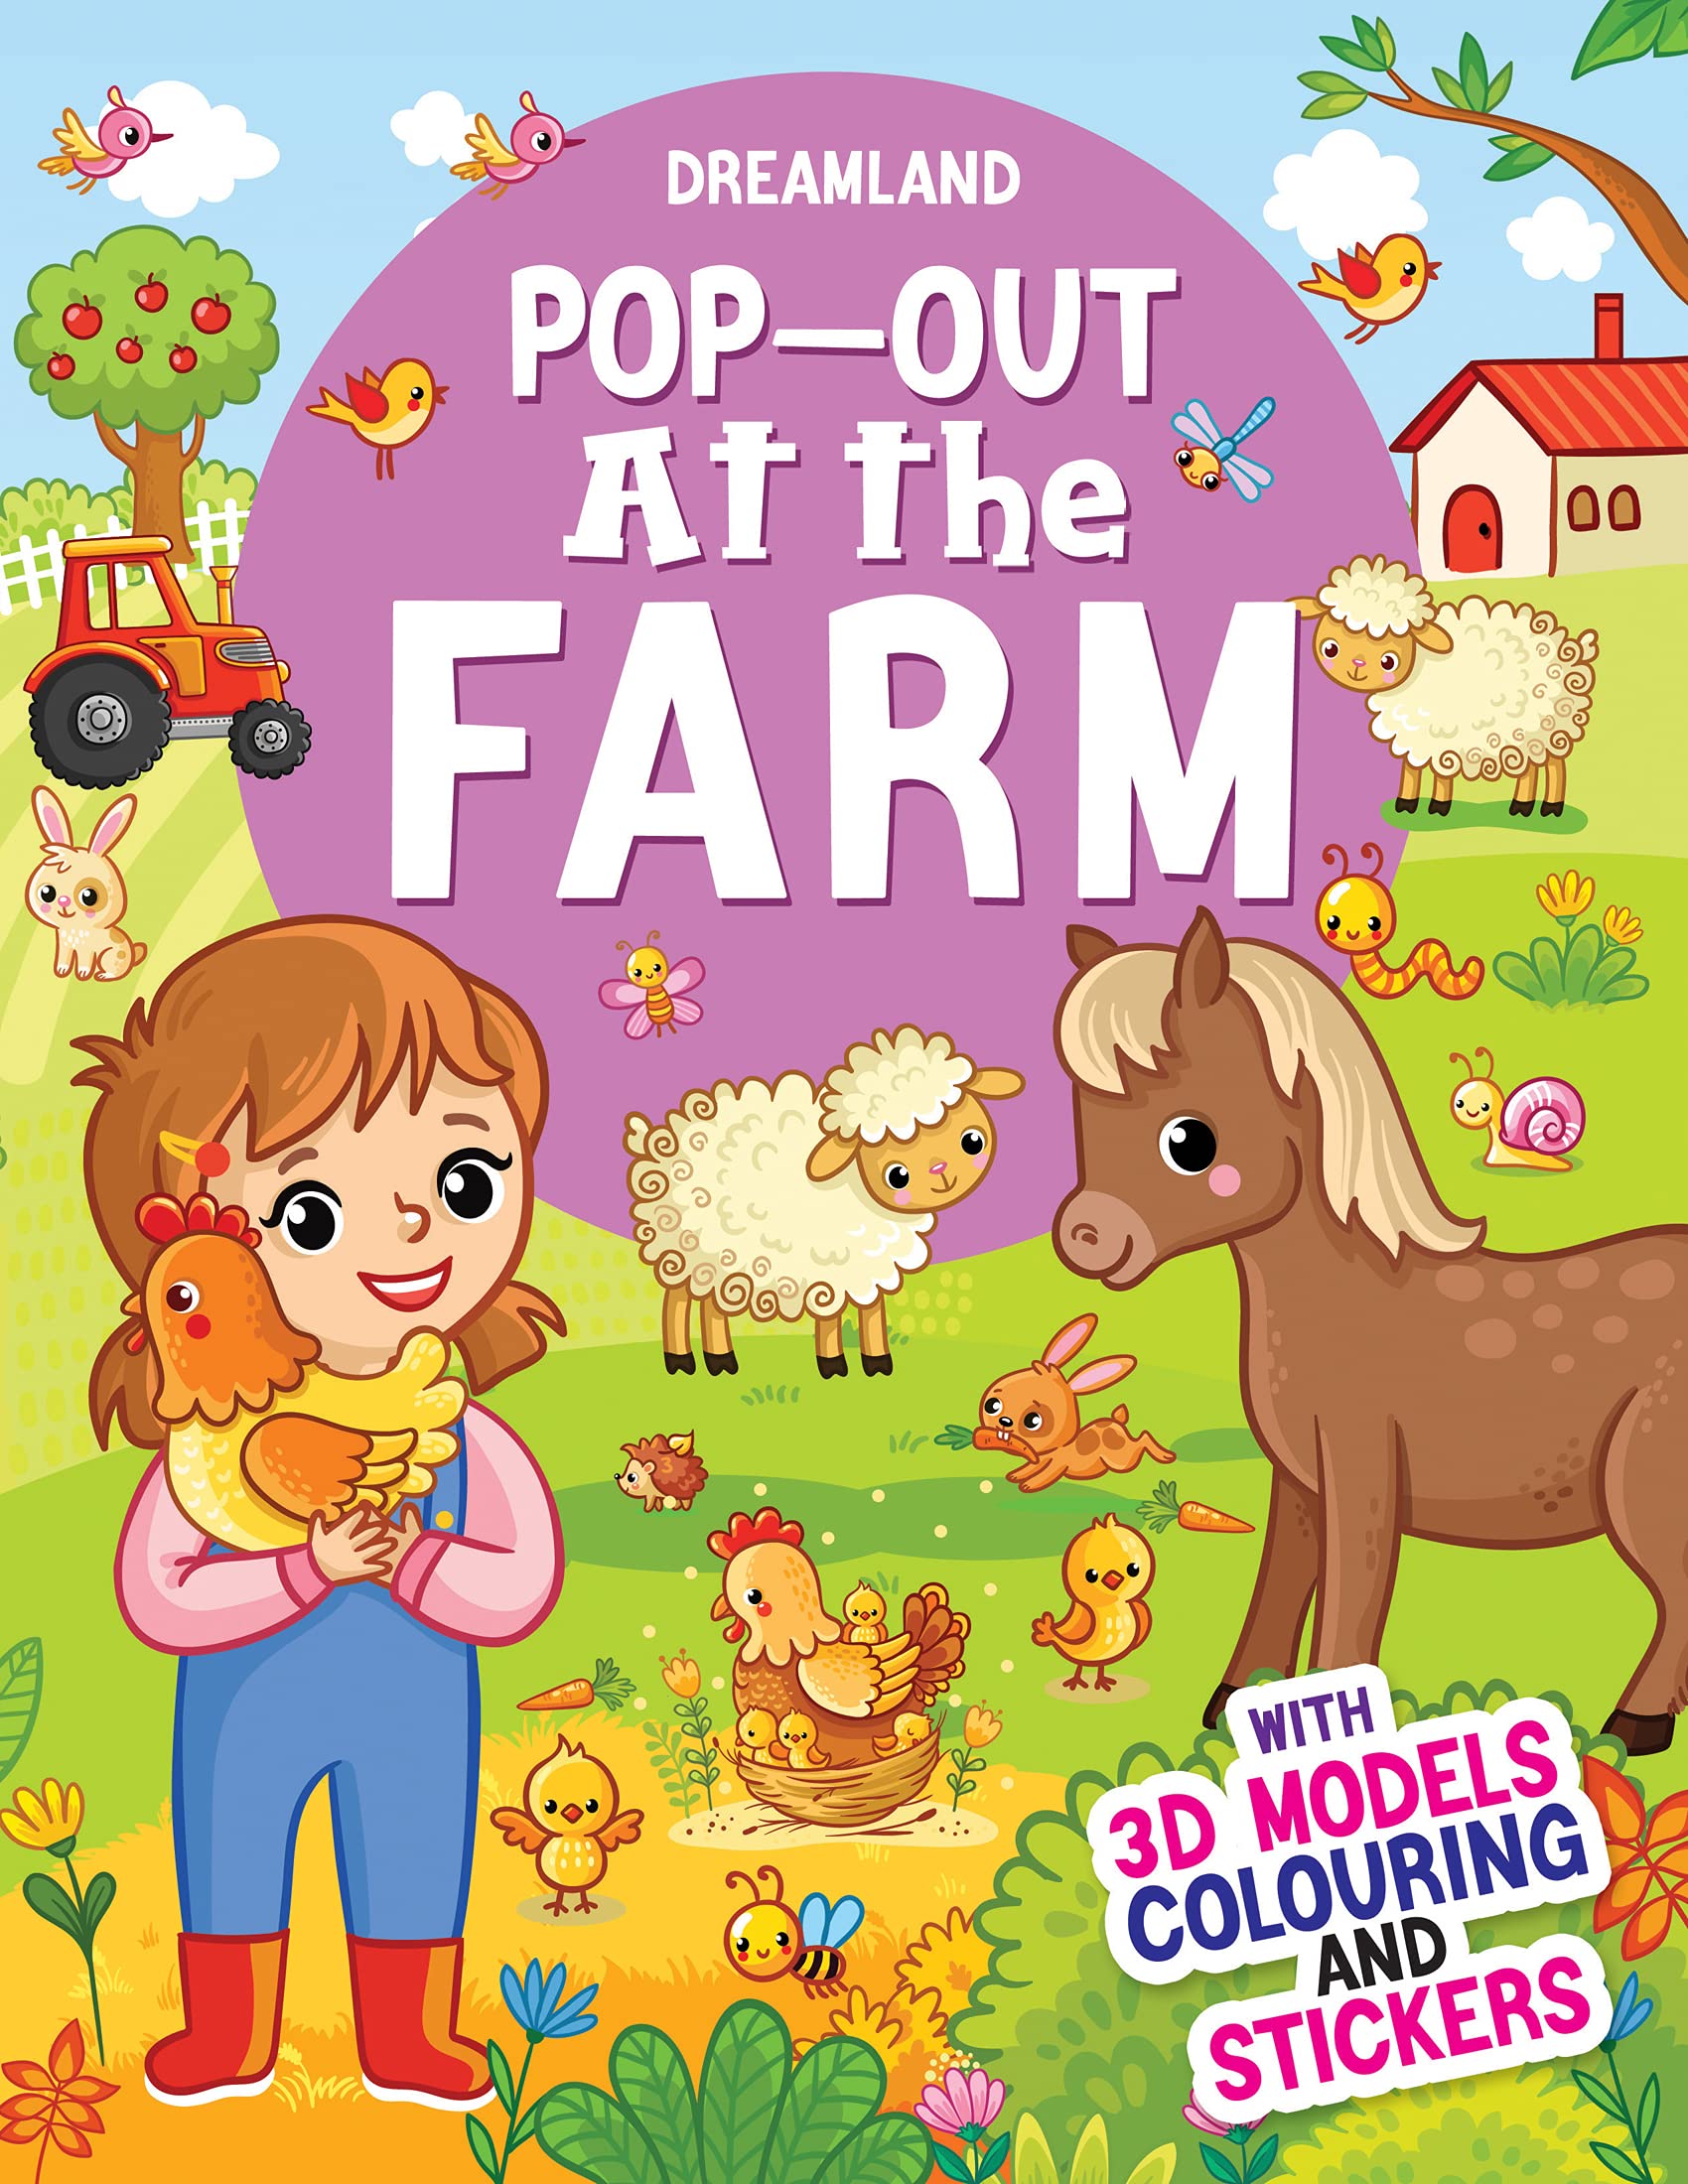 At the Farm - Pop-Out Book with 3D Models Colouring and Stickers